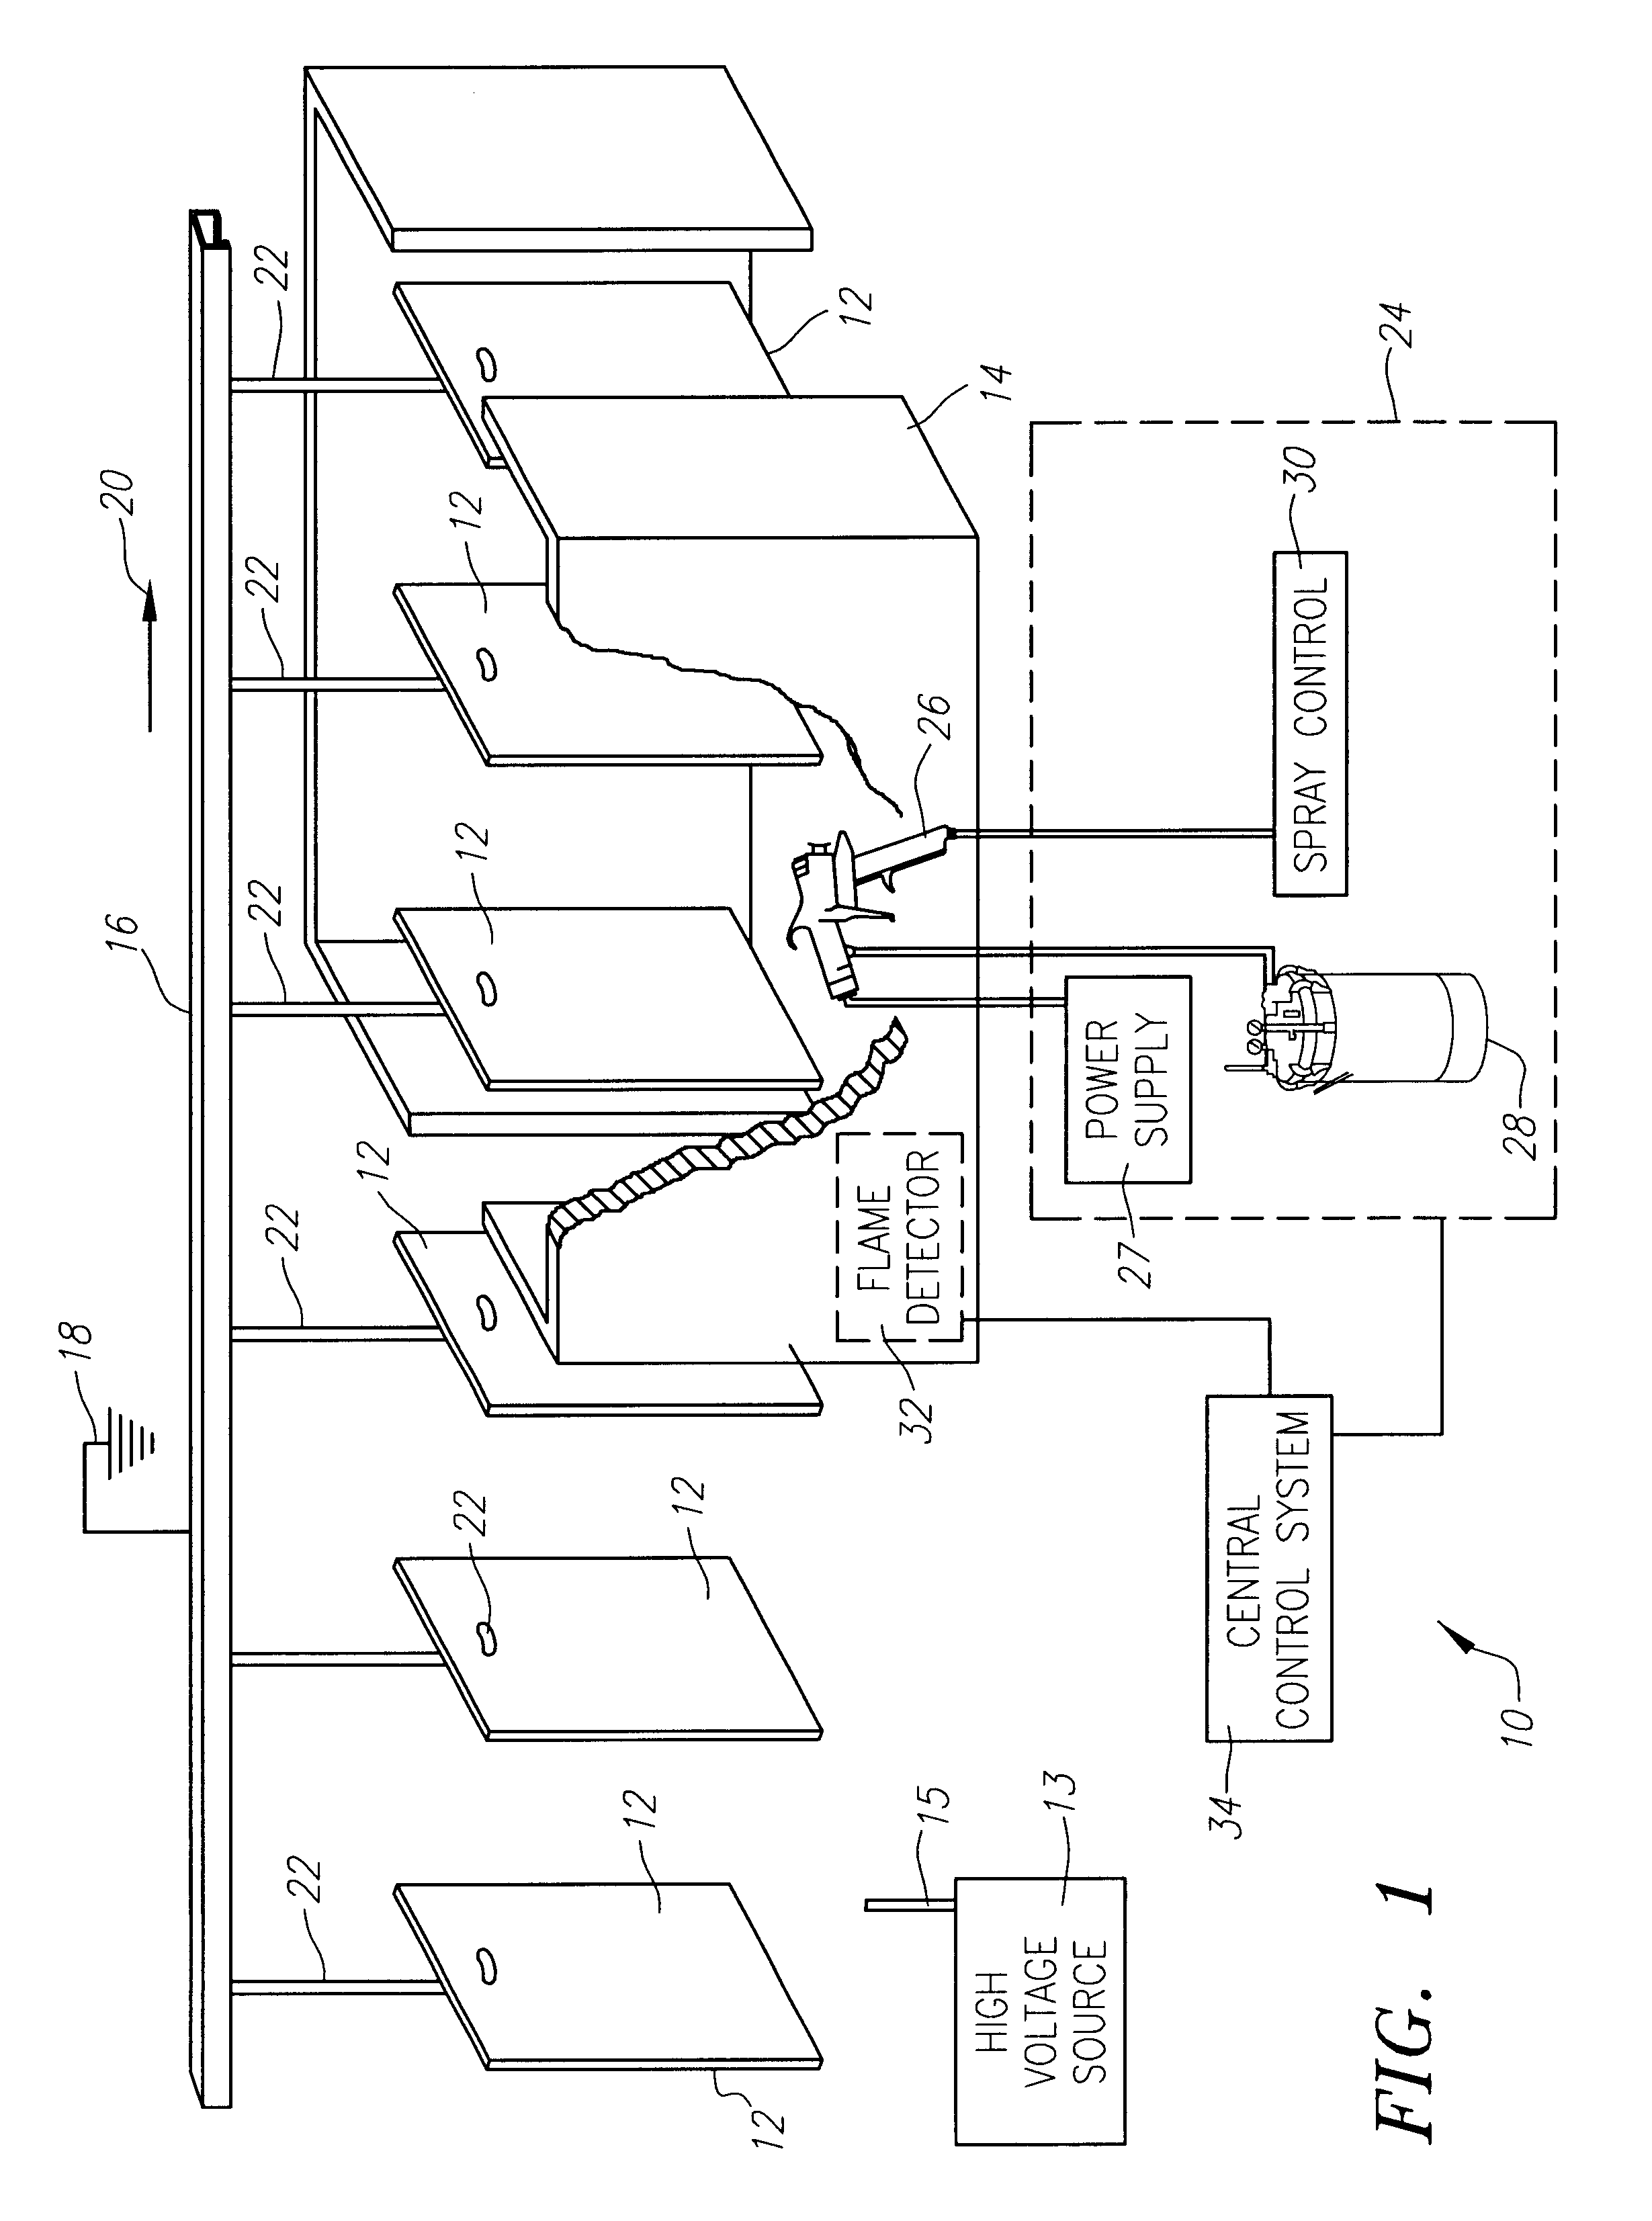 Fire detector with electronic frequency analysis